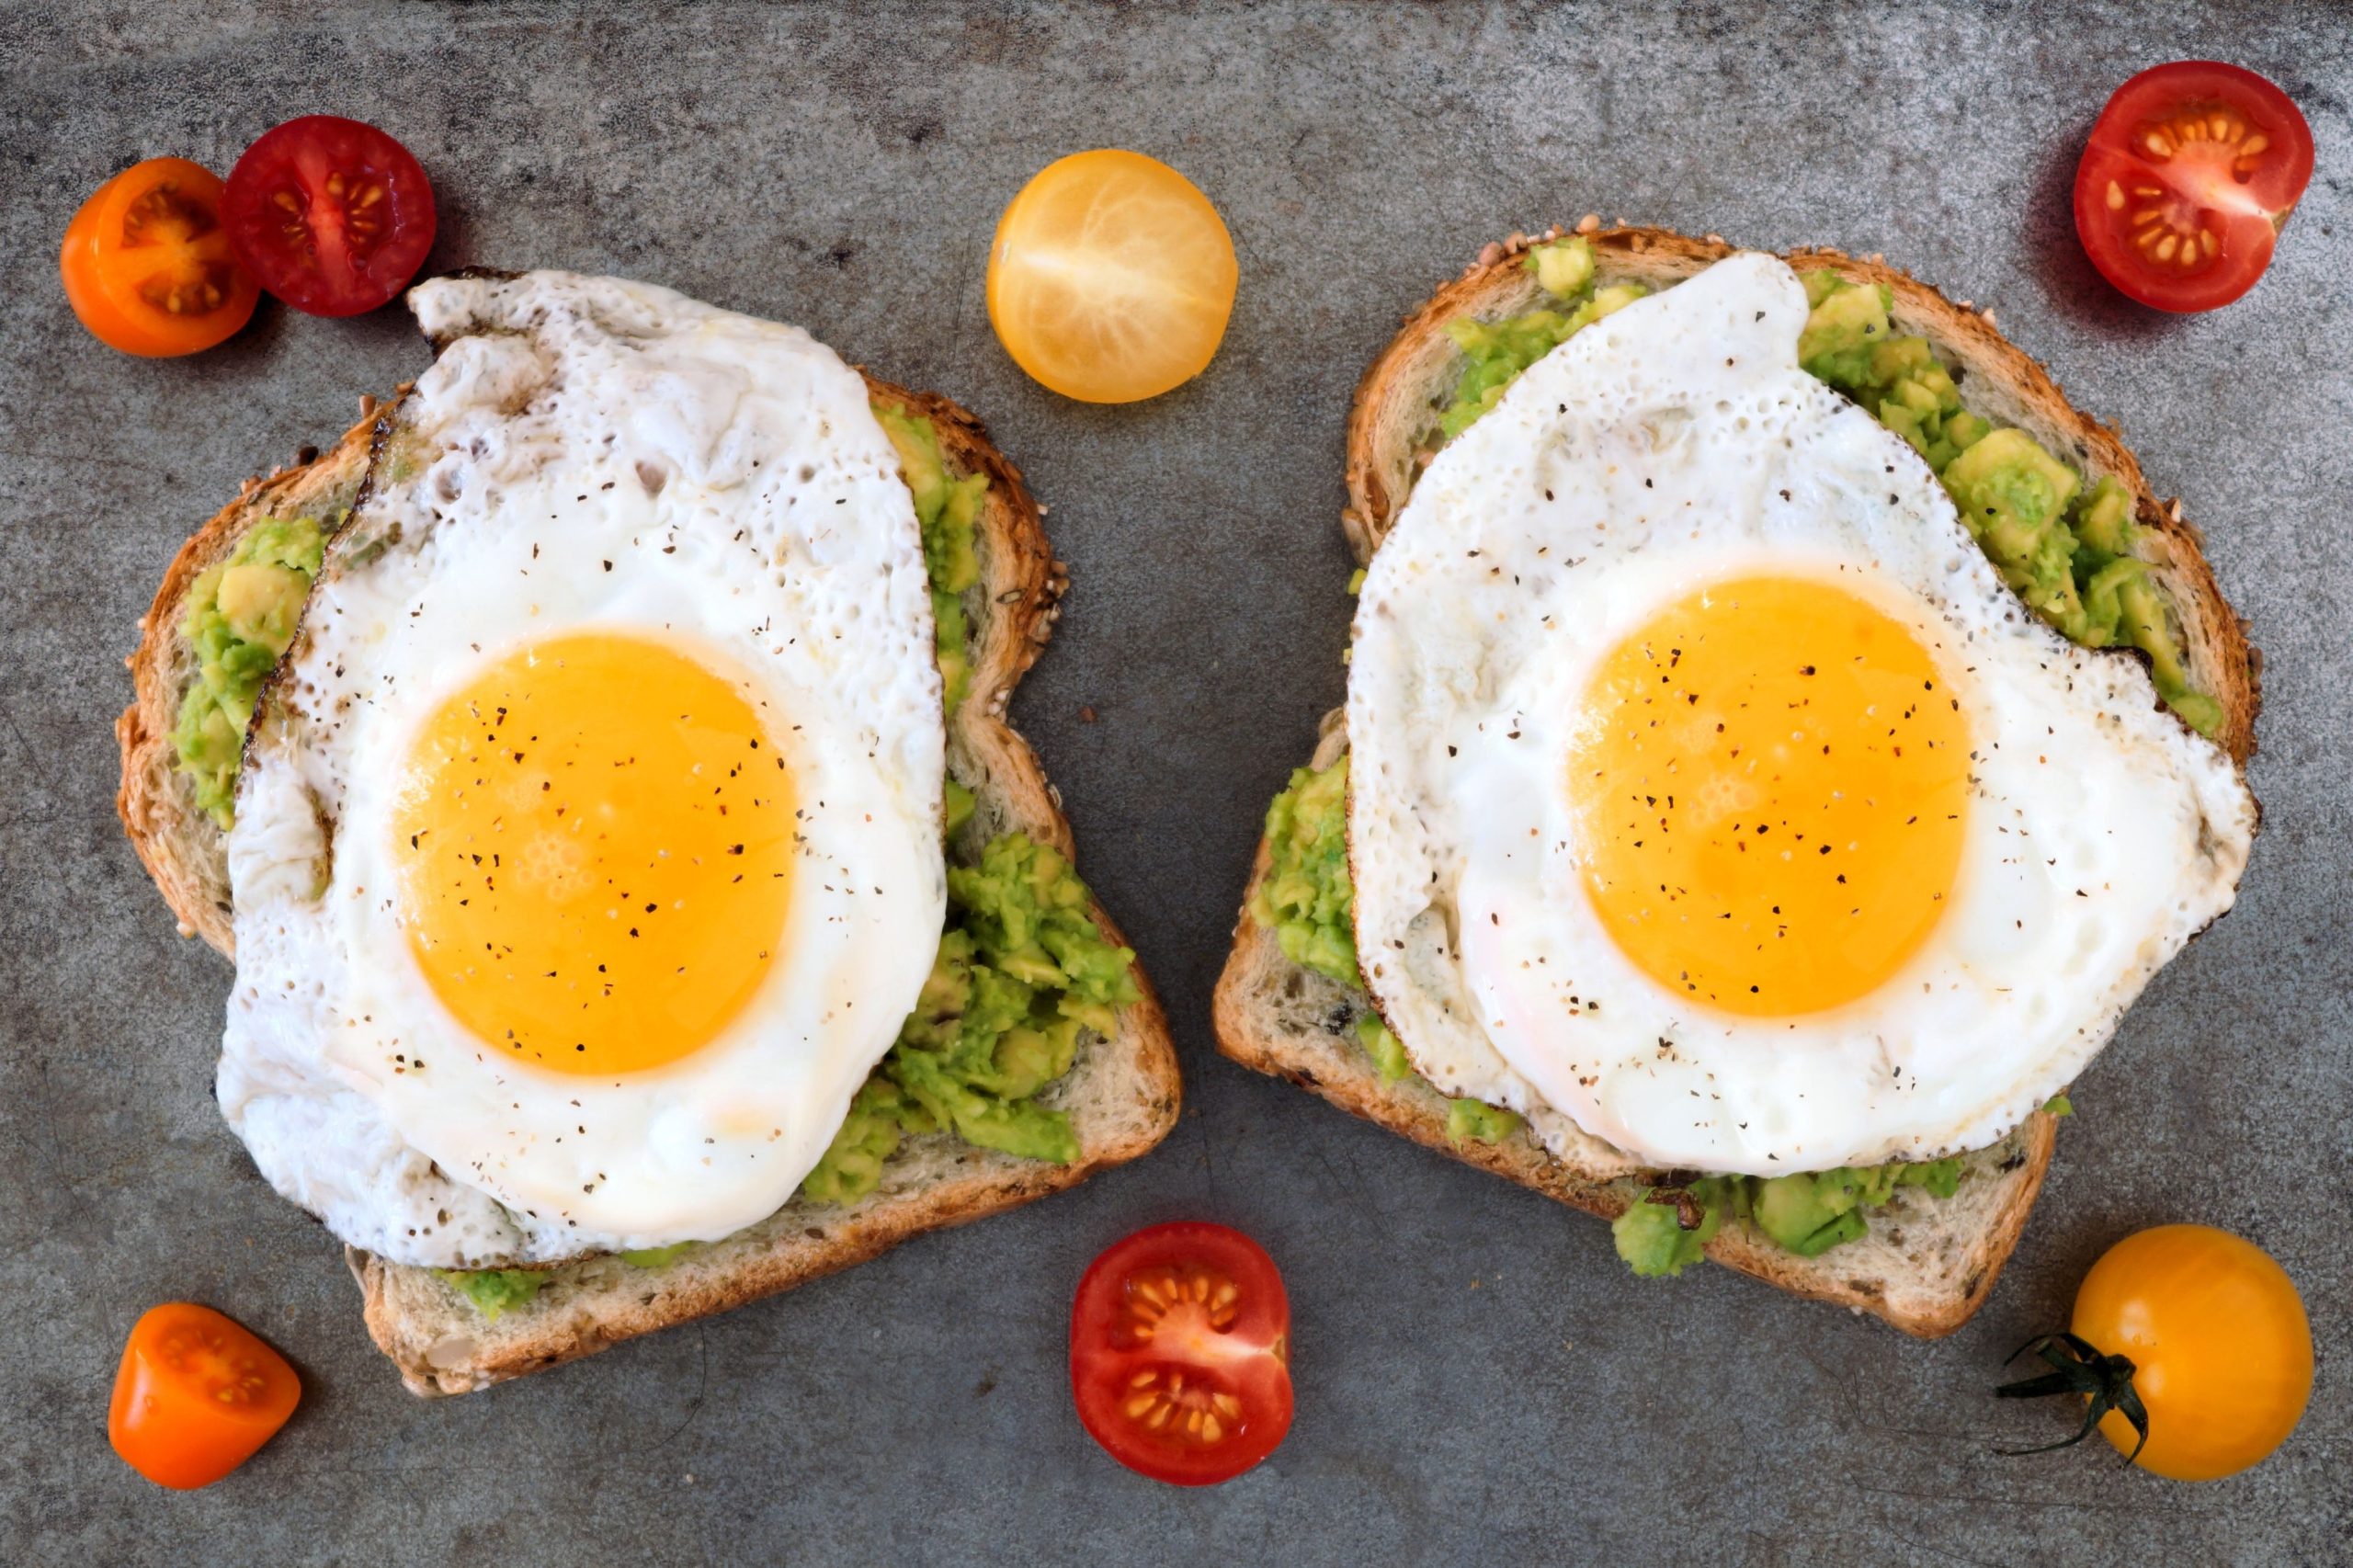 Supercharge Your Breakfast: Nutrient-Rich Morning Meals